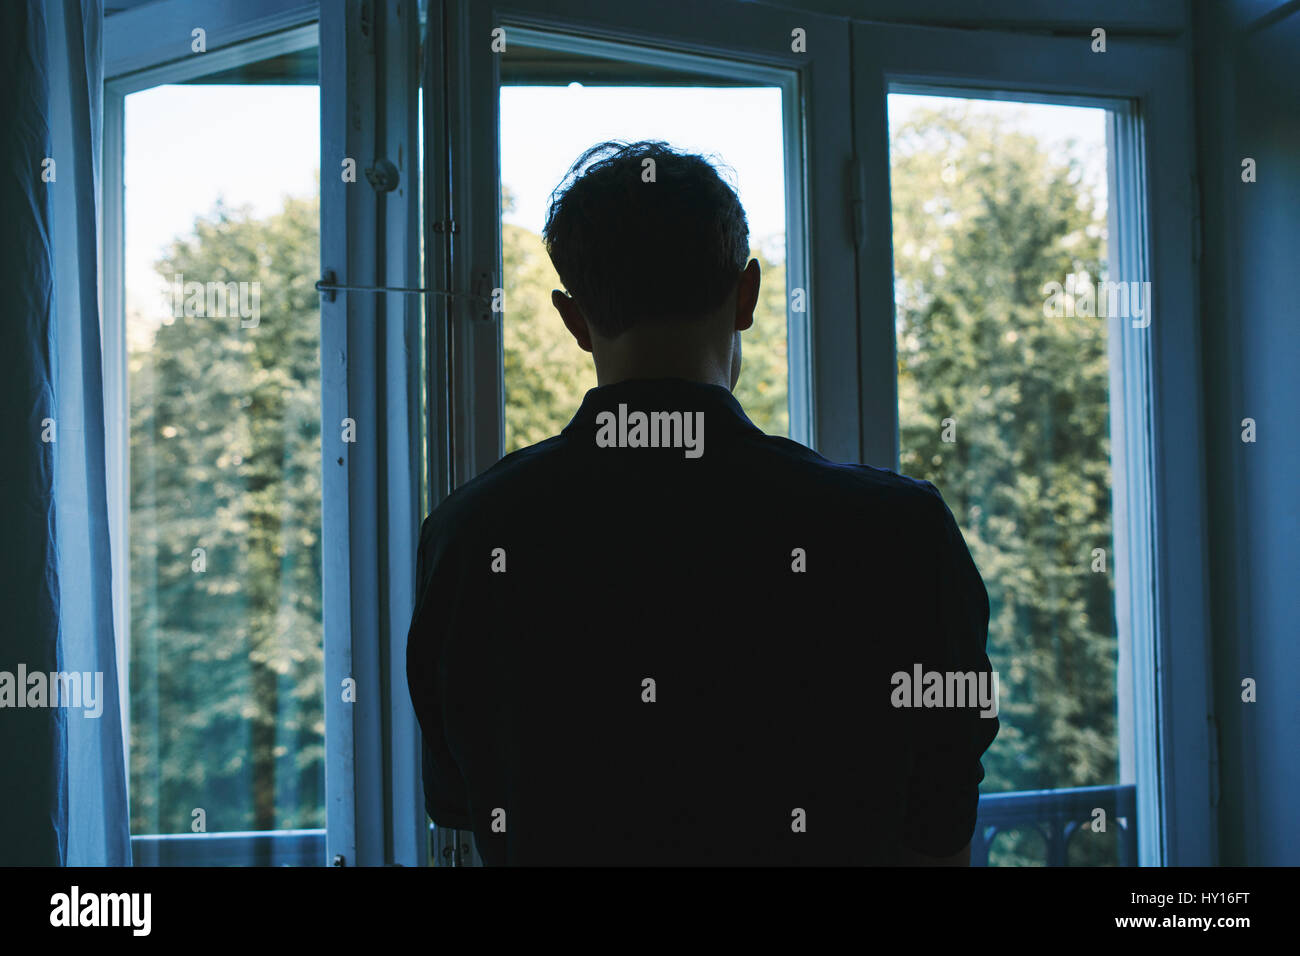 Sweden, Young man looking through window Stock Photo